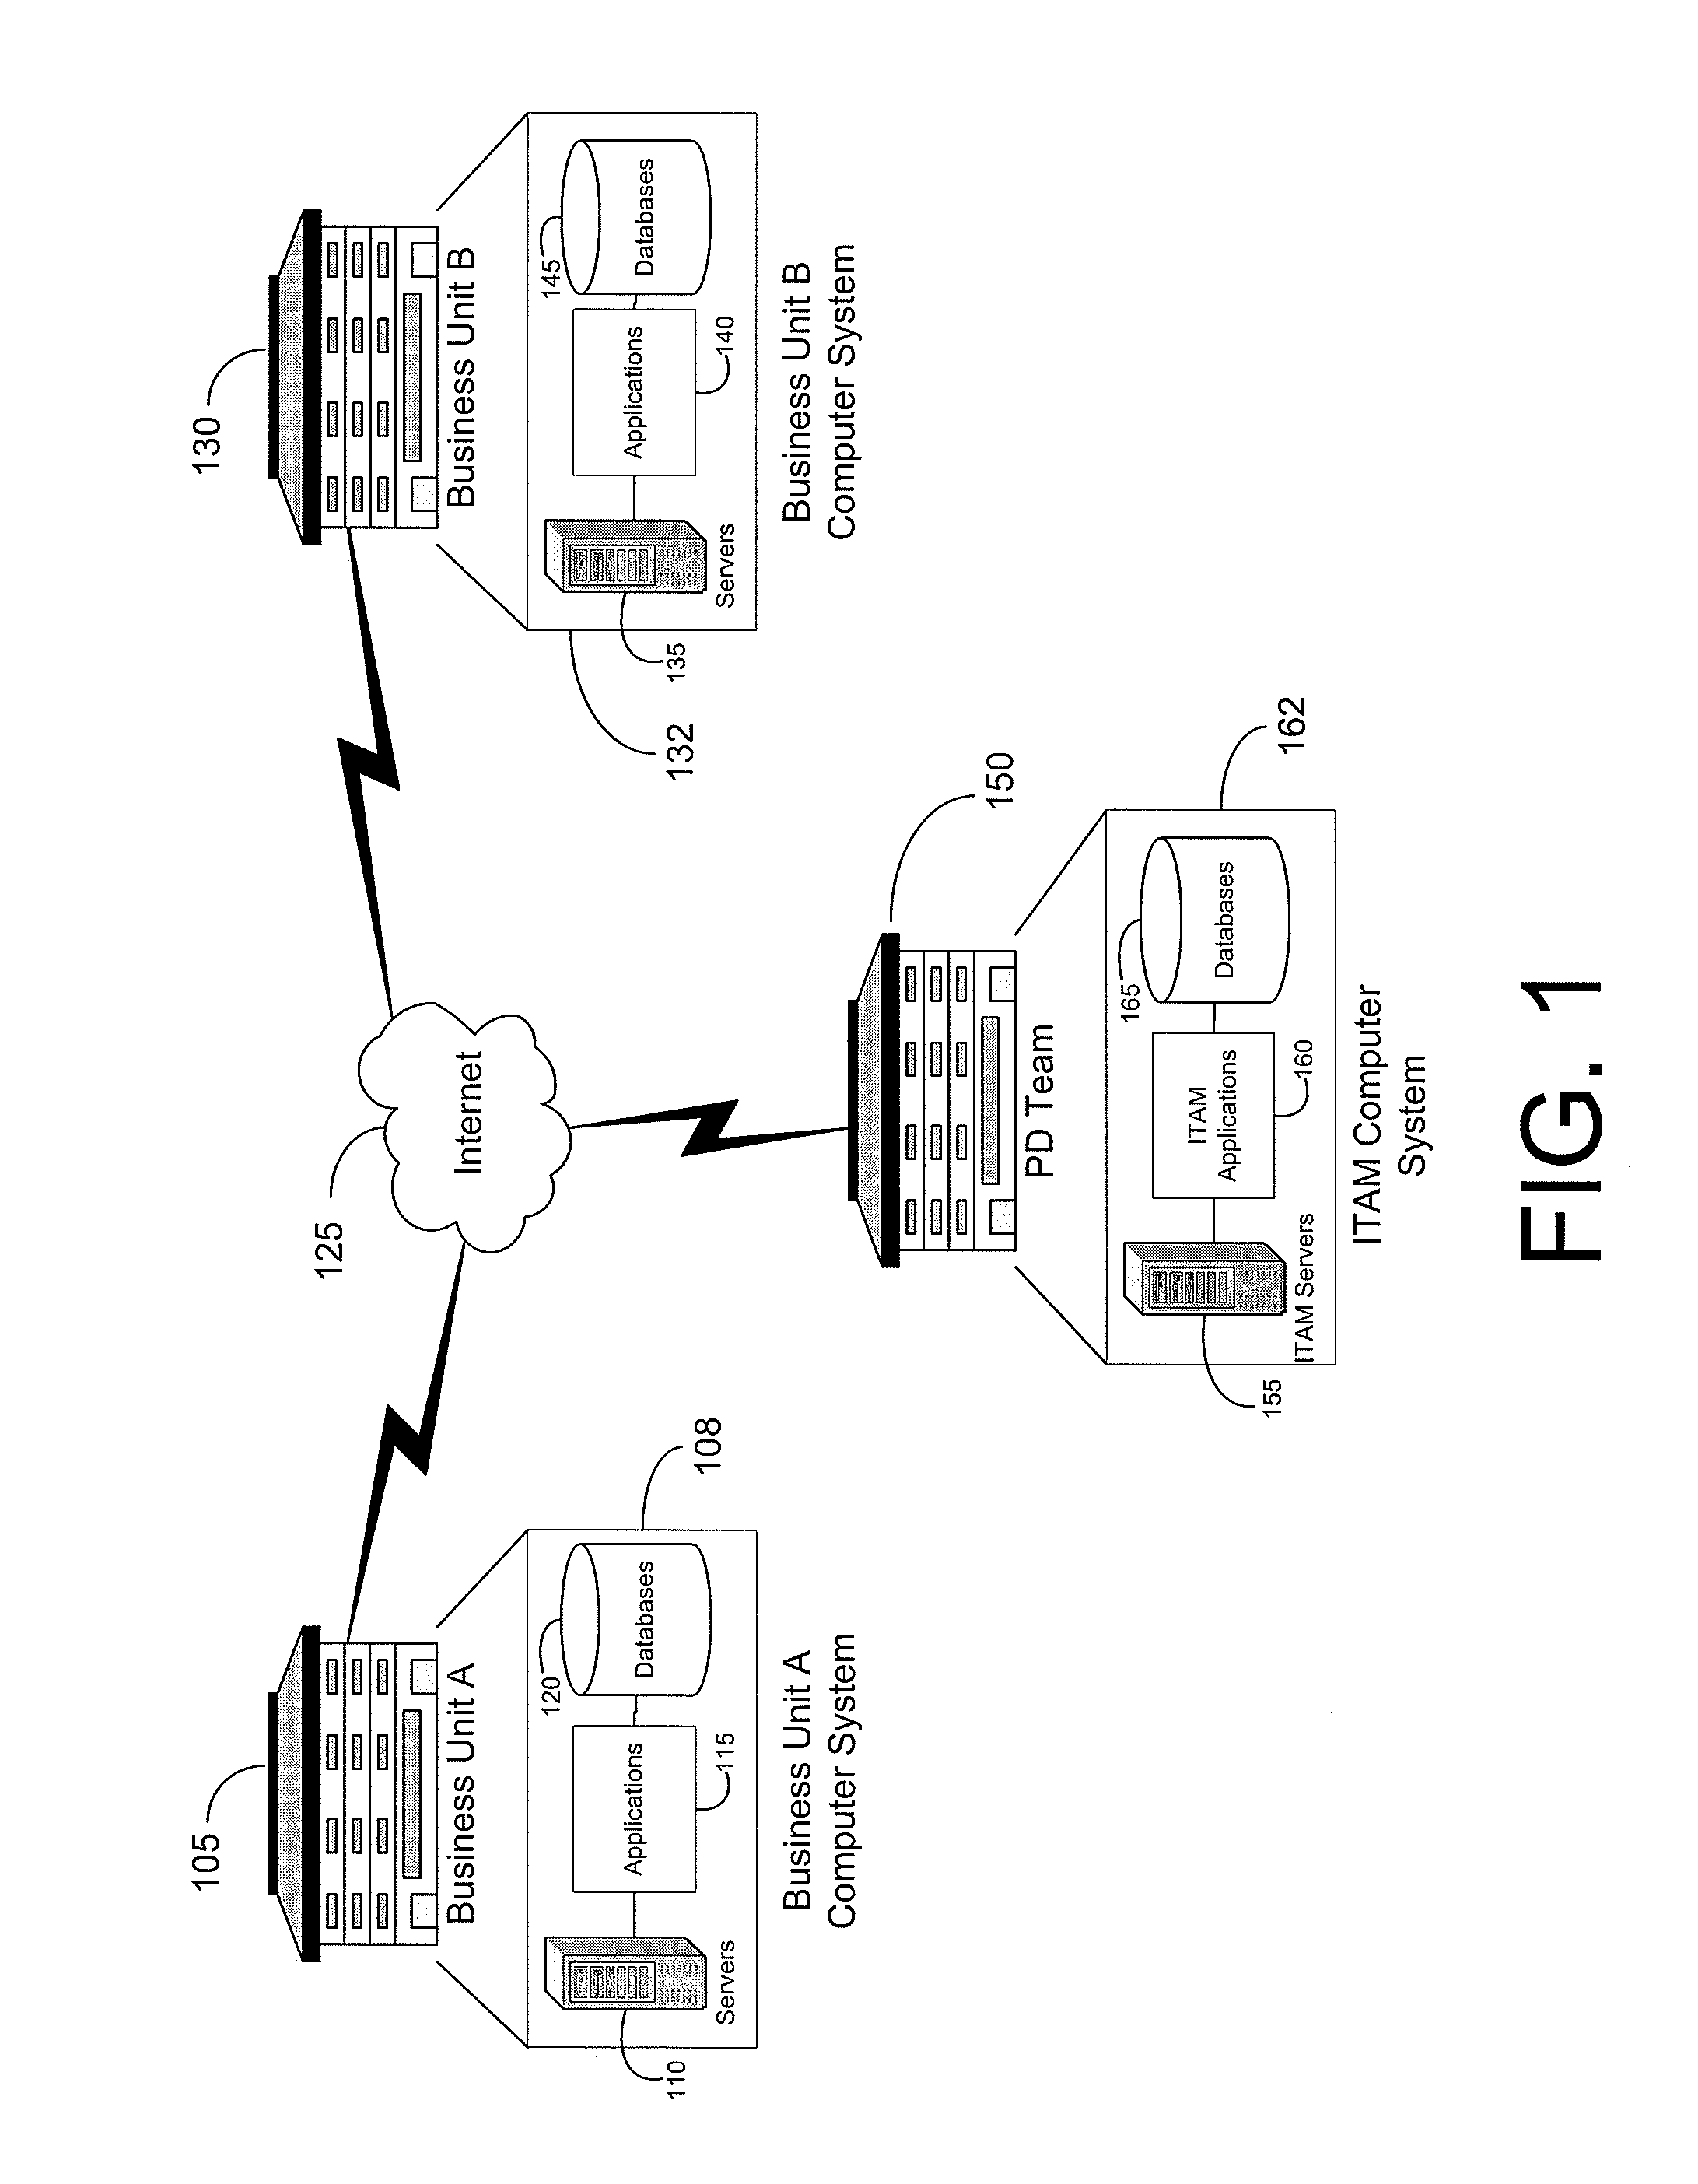 Method and System of Developing a Product